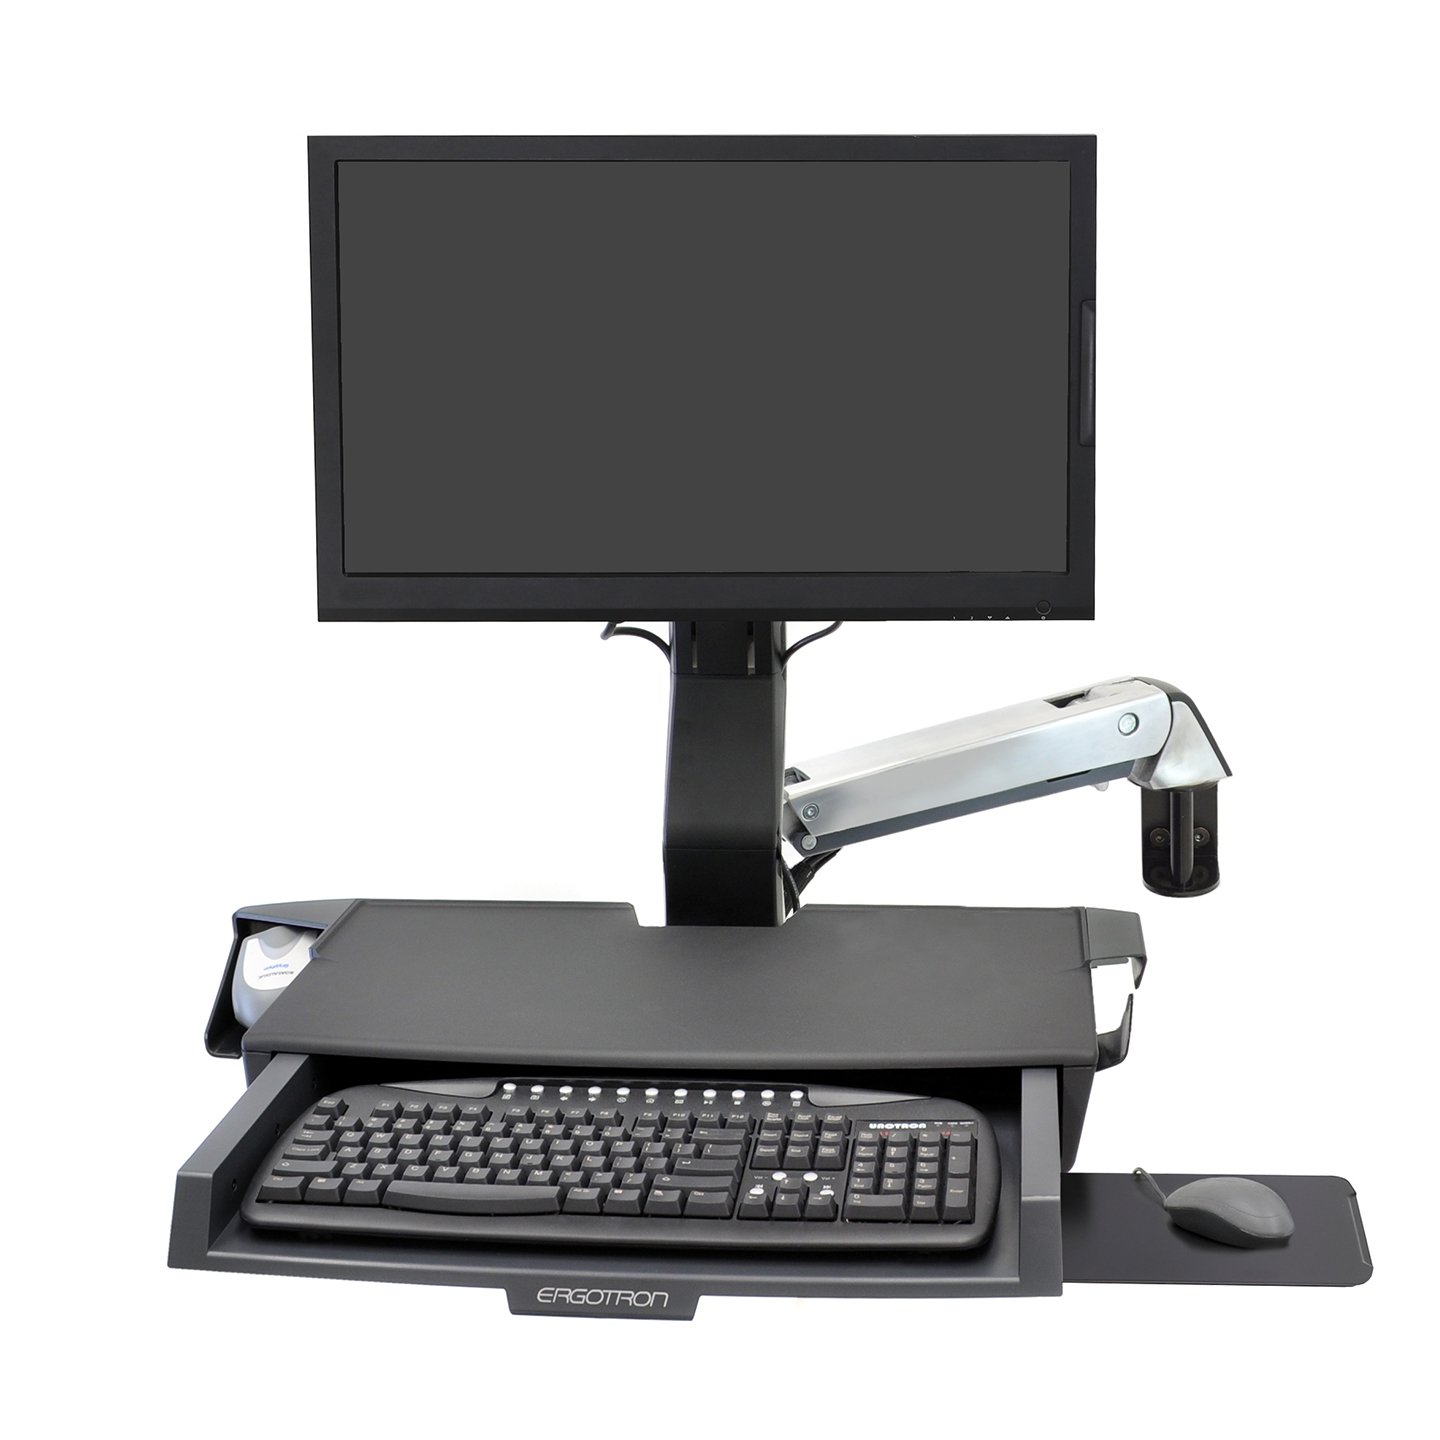 Haworth StyleView Sit to Stand Workspace in black with monitor and key board folded out